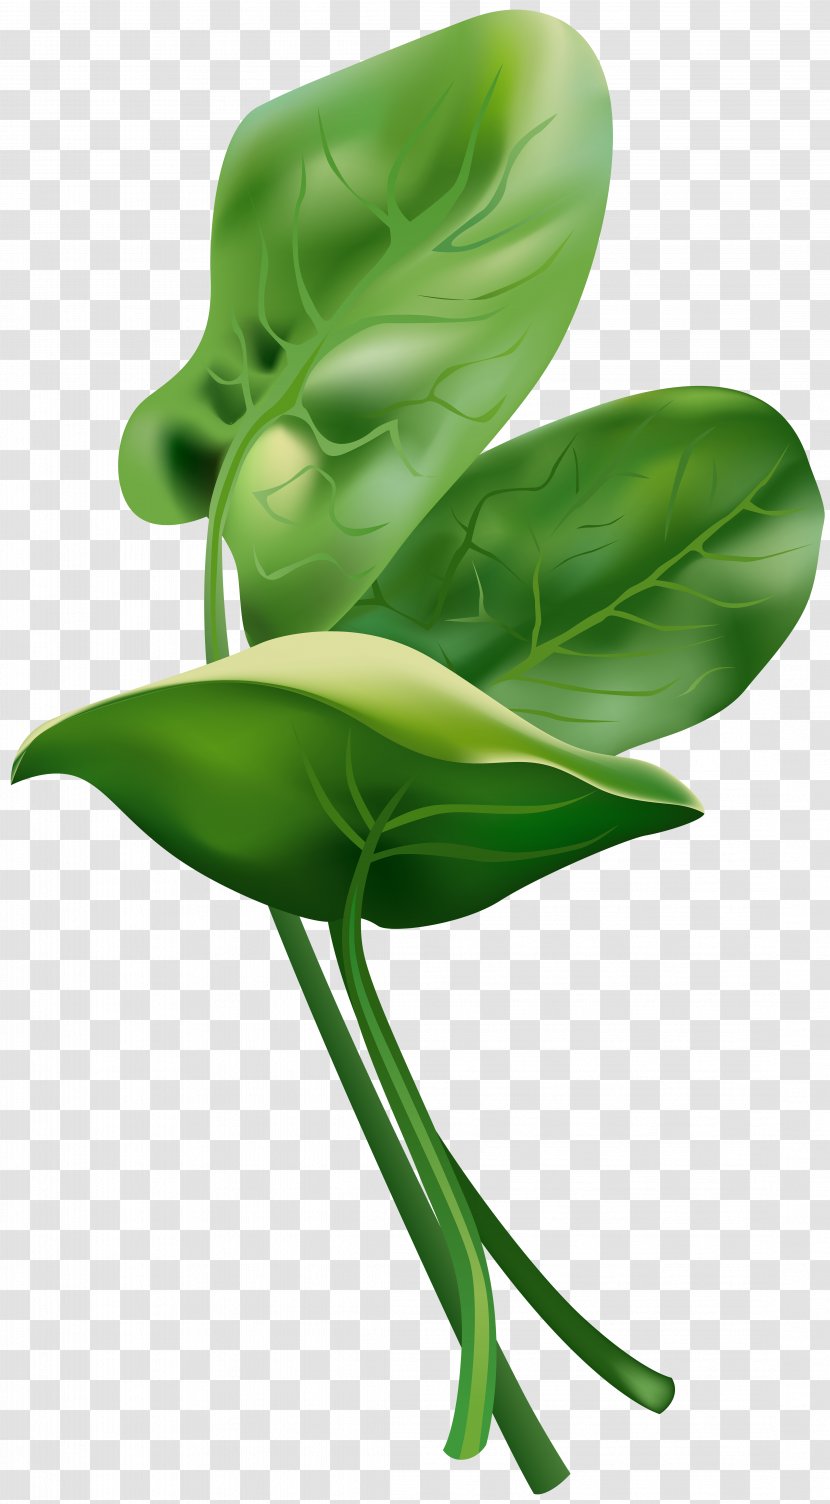 Spinach Clip Art - Drawing - Free Image Transparent PNG